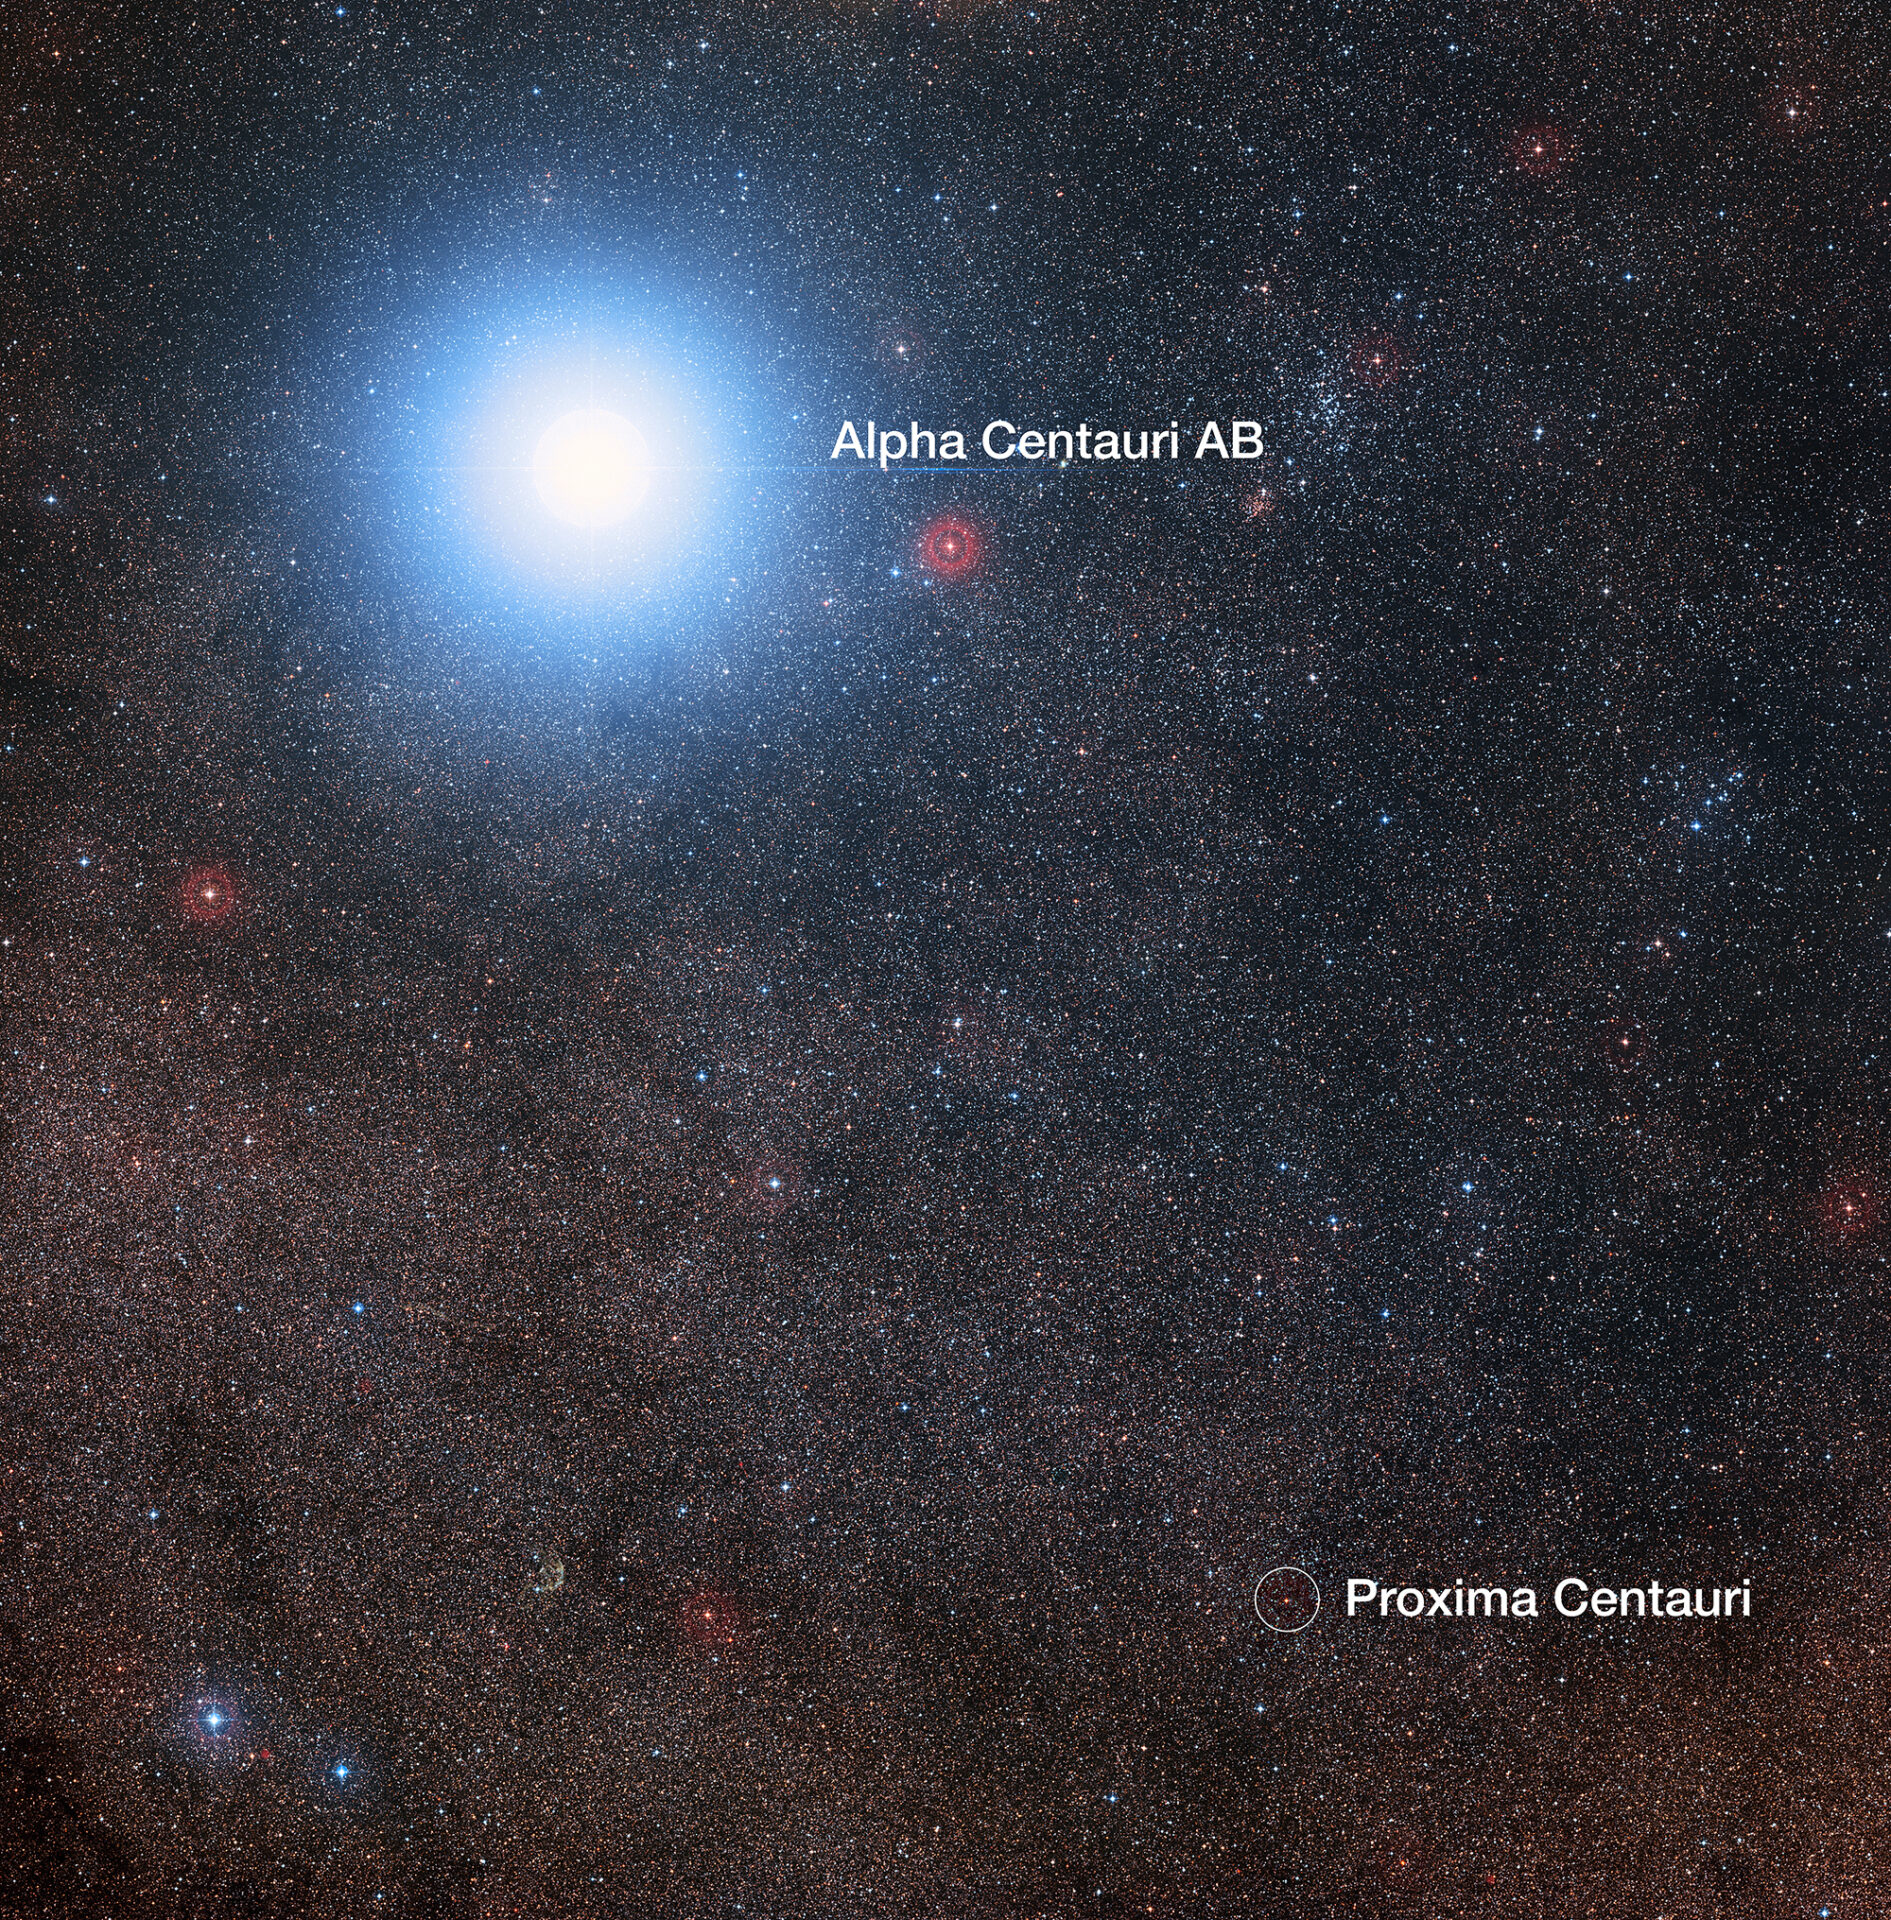 <p>This image of the sky around the bright star Alpha Centauri AB also shows the much fainter red dwarf star, Proxima Centauri, the closest star to the Solar System. The picture was created from pictures forming part of the Digitized Sky Survey 2. The blue halo around Alpha Centauri AB is an artifact of the photographic process, the star is really pale yellow in colour like the Sun. Credit:<br />
Digitized Sky Survey 2 | Acknowledgement: Davide De Martin/Mahdi Zamani</p>
